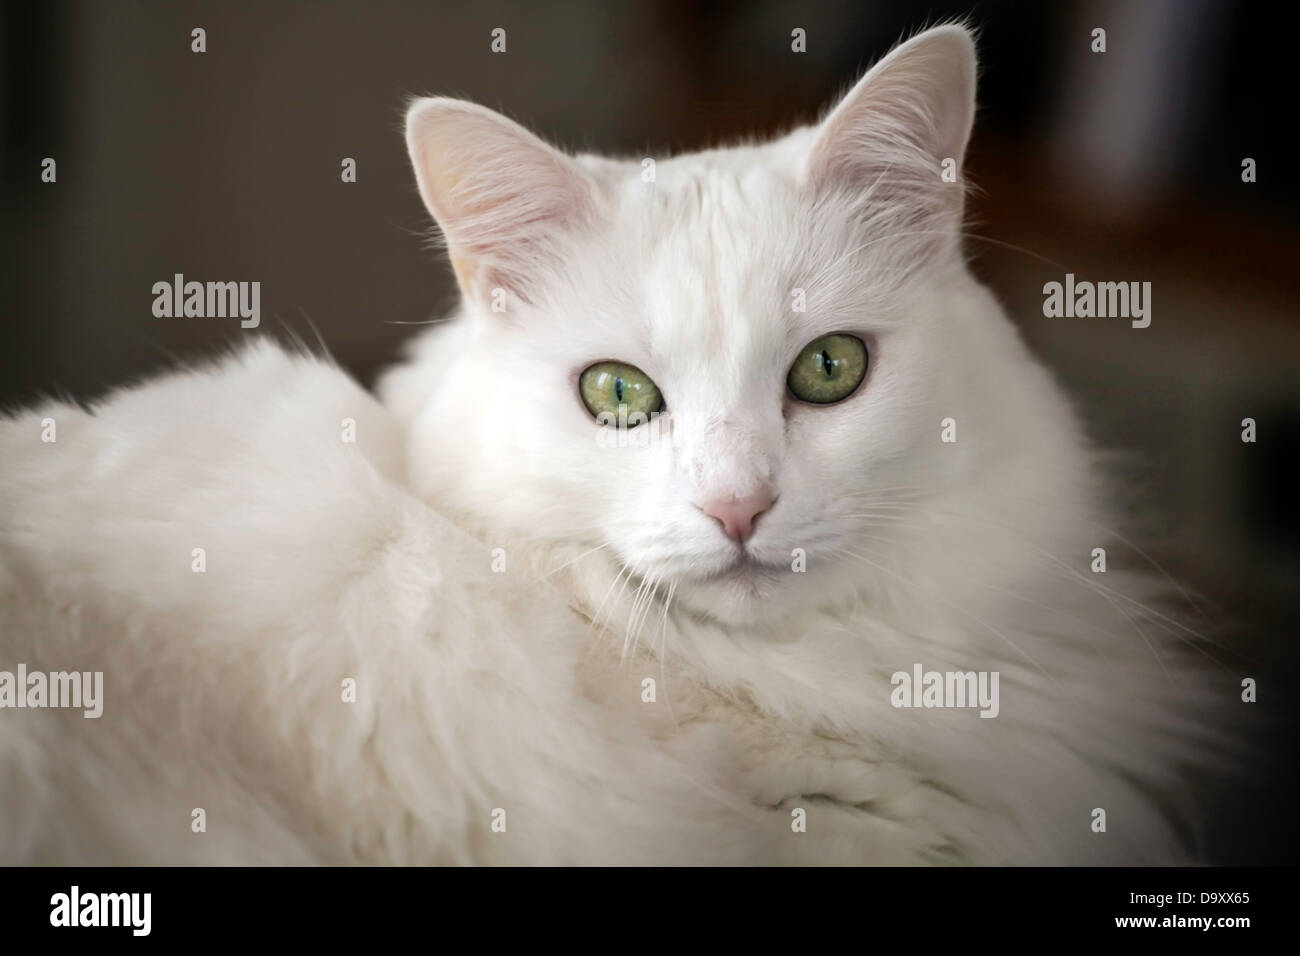 Long-haired domestic white cat. Stock Photo